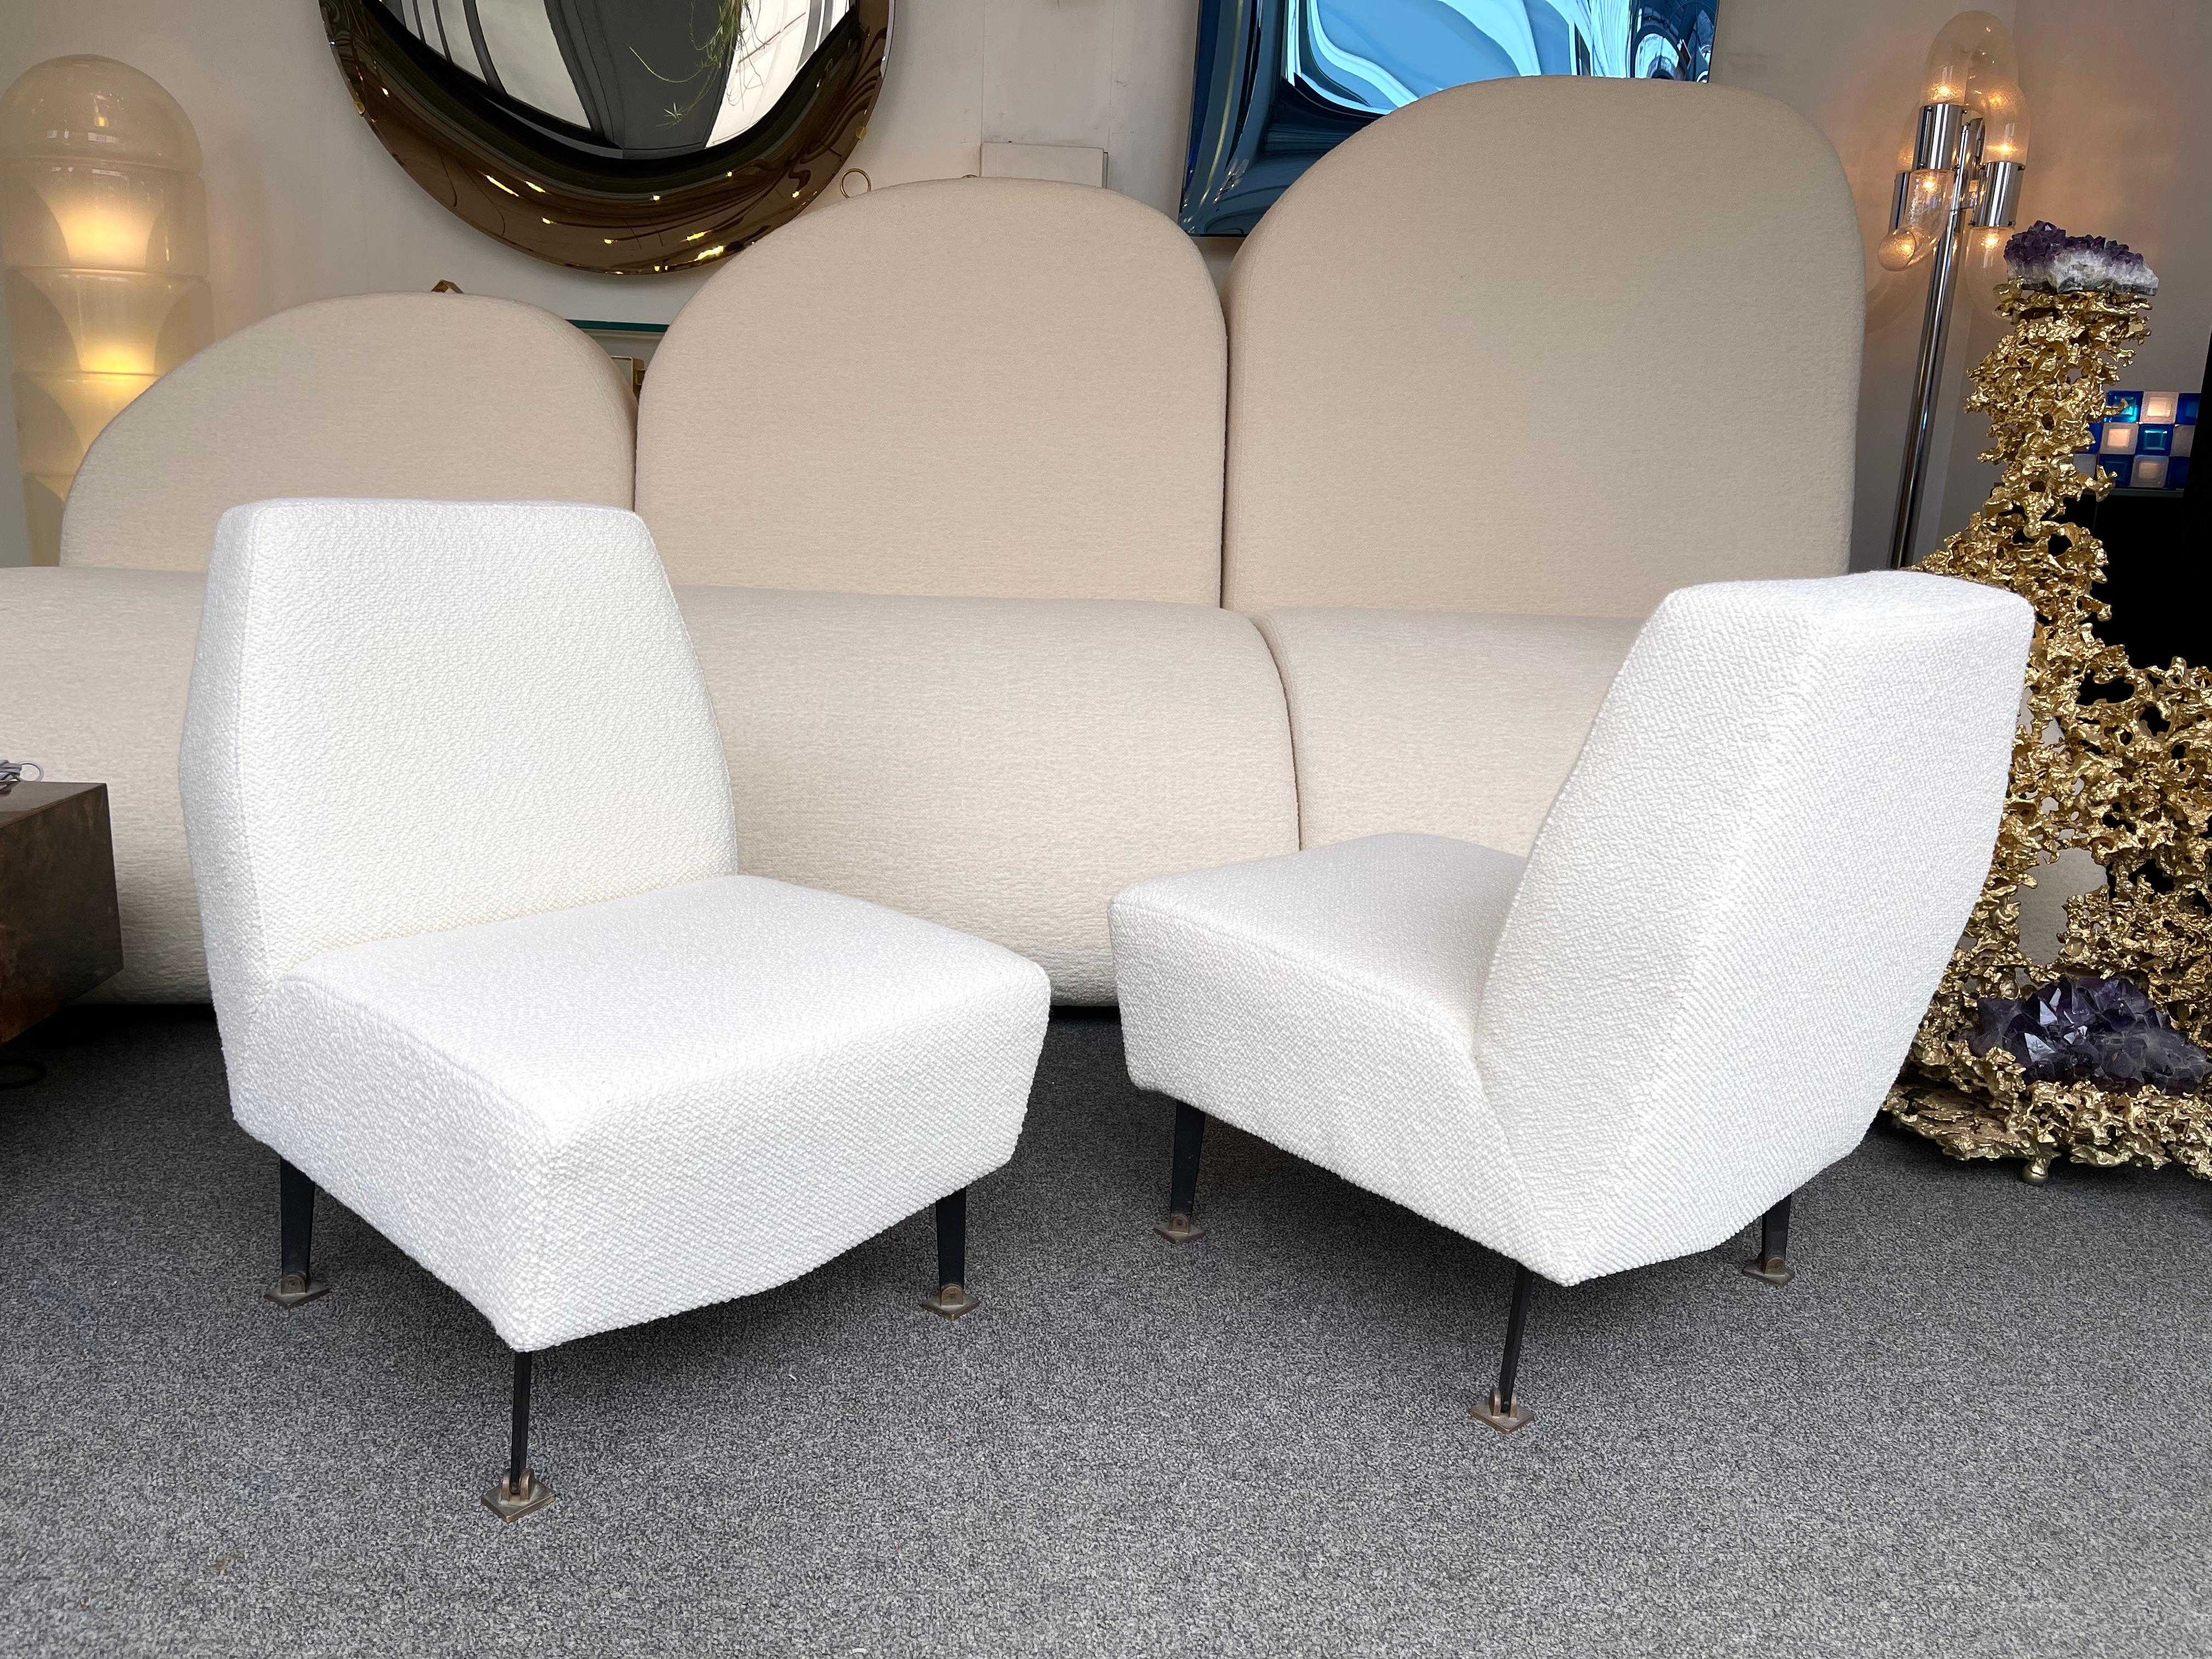 Pair of Slipper Chairs Bouclé Fabric by Studio APA for Lenzi, Italy, 1960s For Sale 4